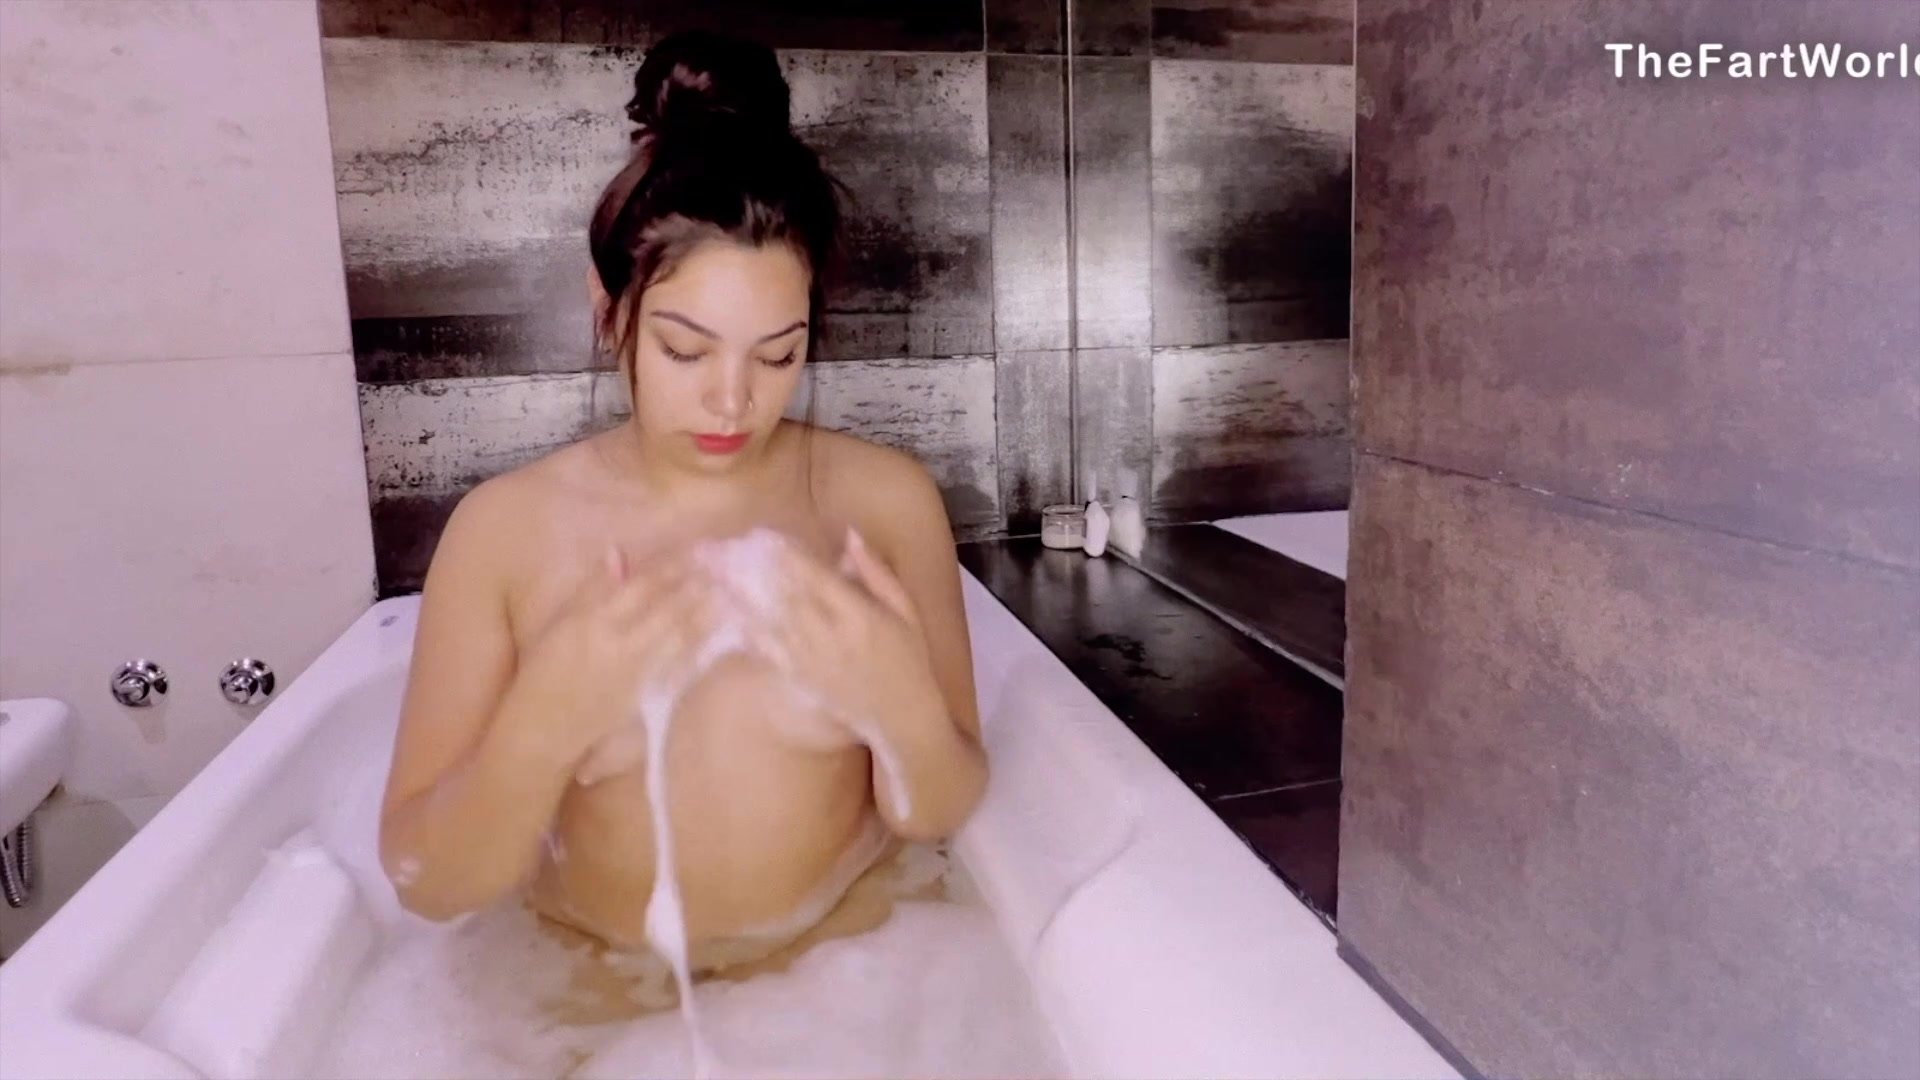 The Hottest Fart Girl Making Bubbles In The Tub